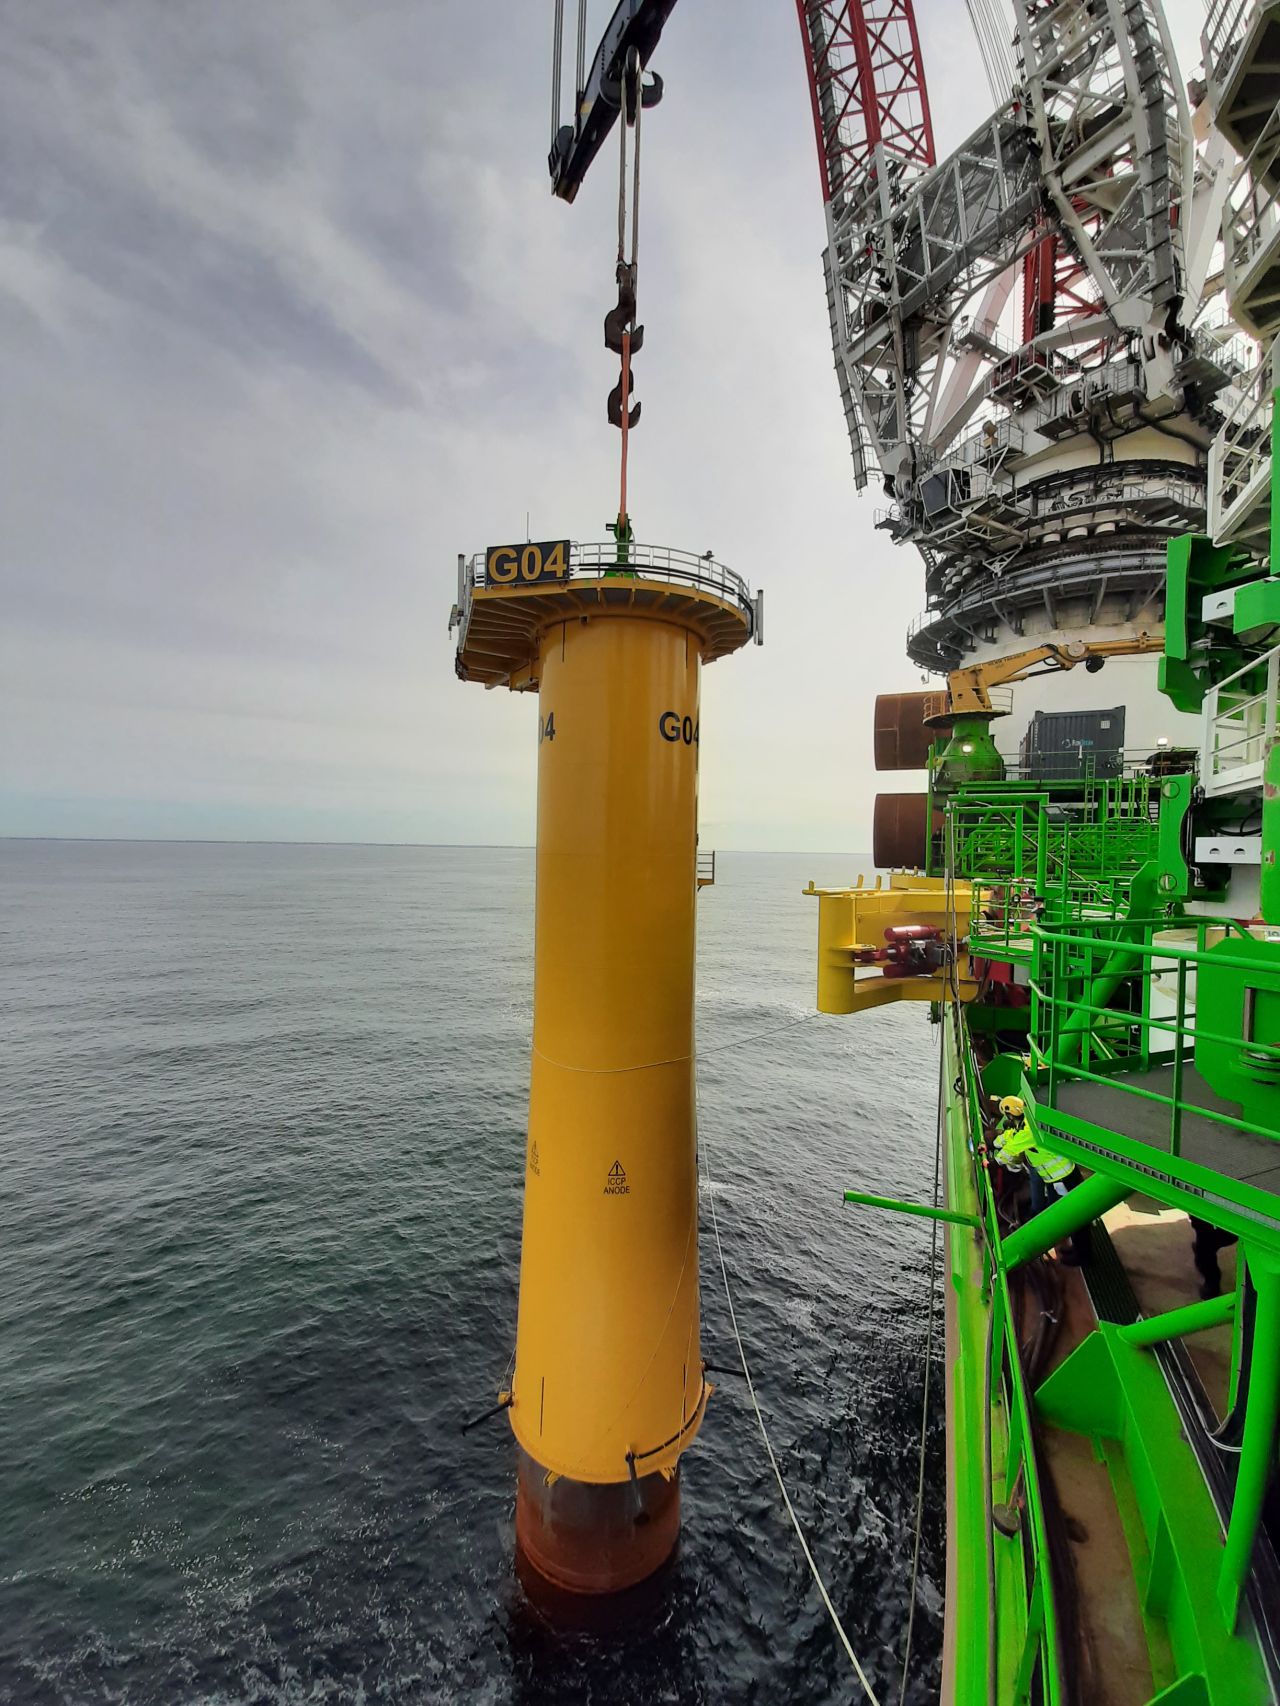 A photo taken from DEME's Innovation vessel during the installation of a yellow transition piece on top of a monopile at Saint-Nazaire offshore site